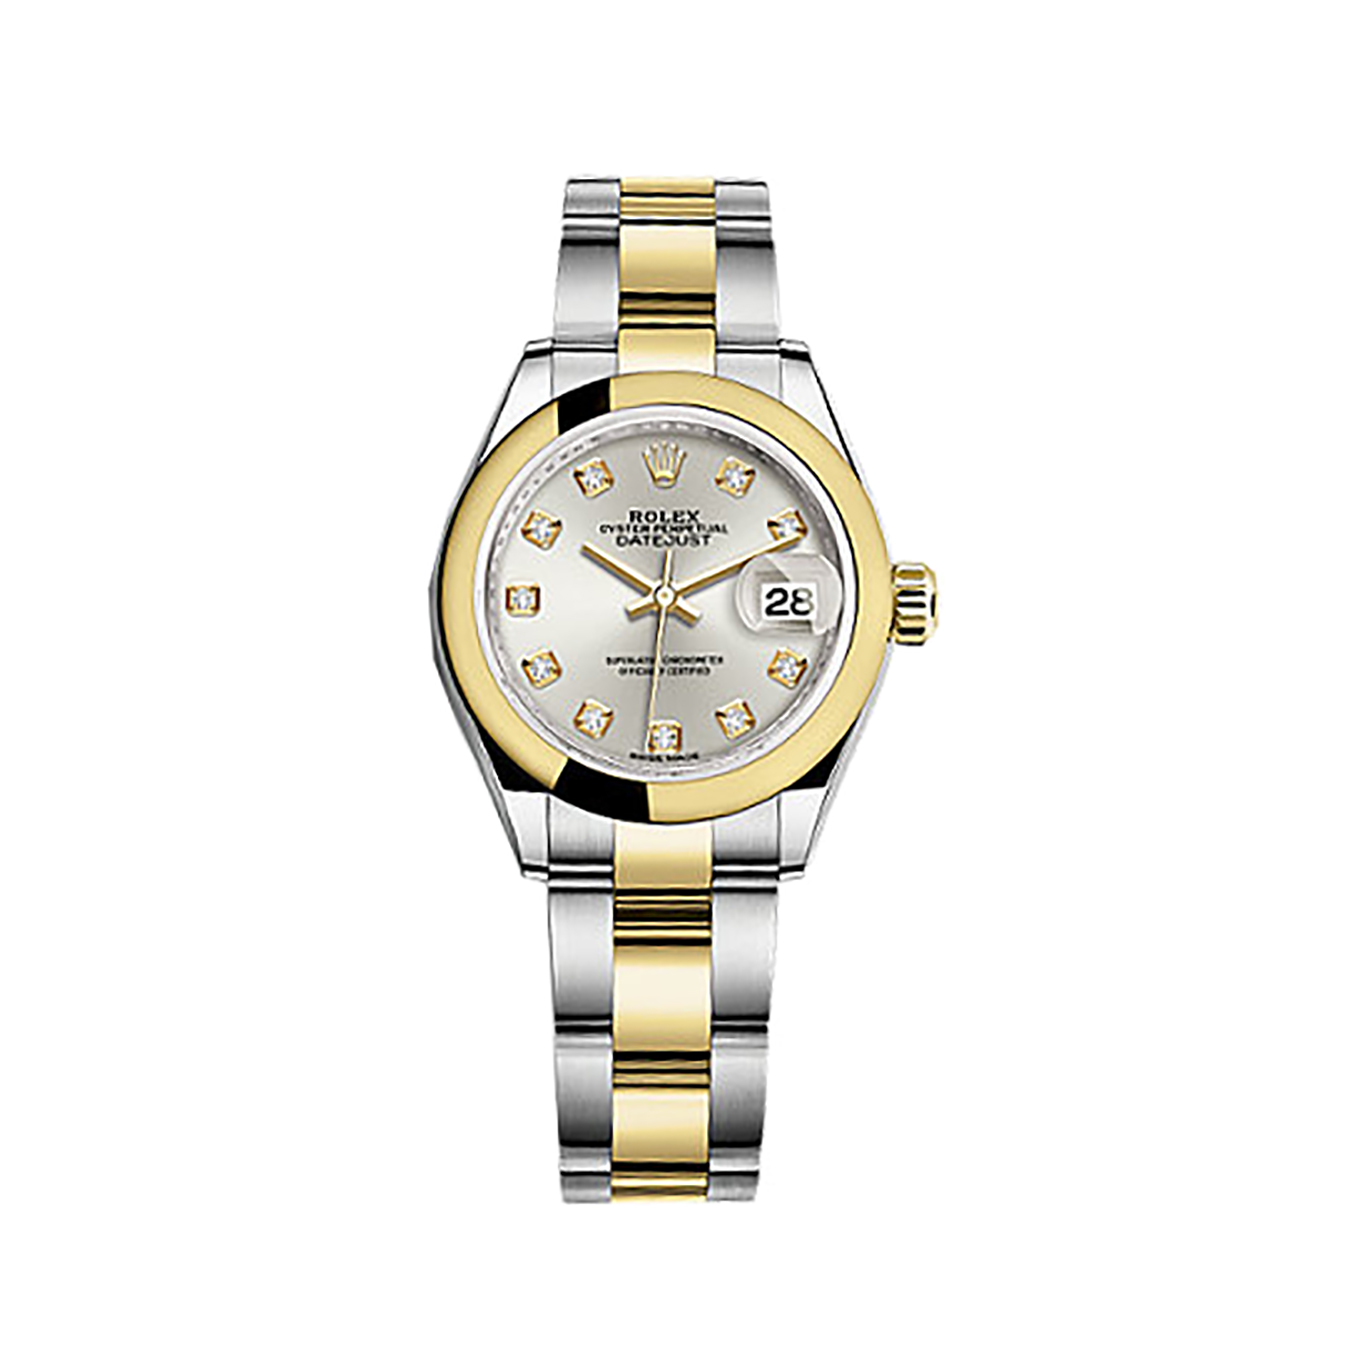 Lady-Datejust 28 279163 Gold & Stainless Steel Watch (Silver Set with Diamonds) - Click Image to Close